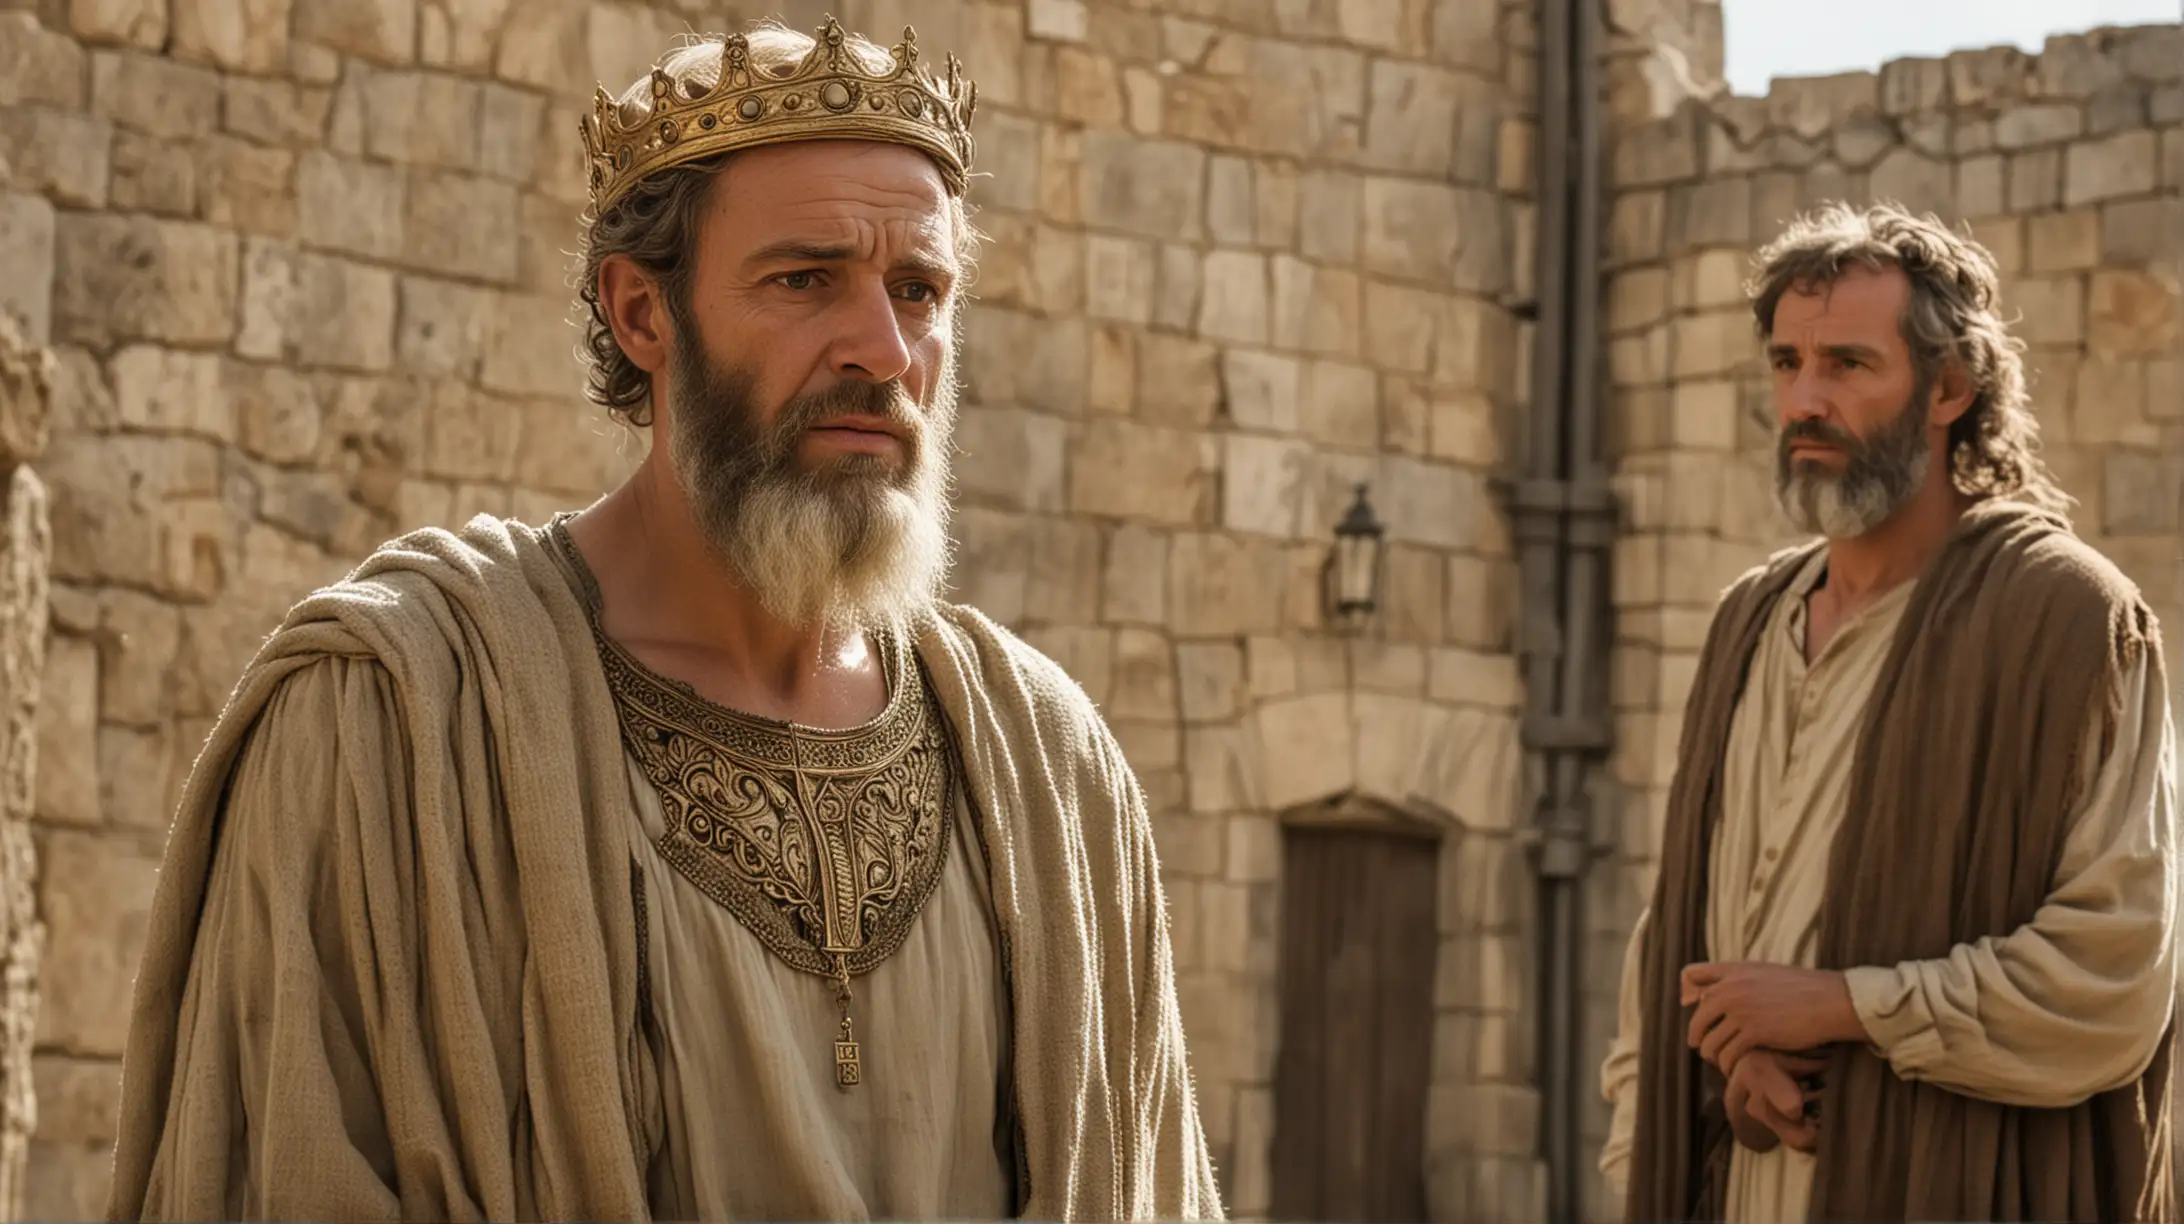 a Tall handsome 40 year old king Saul beside an old man of average height  in town. Set during the Biblical era of King David.